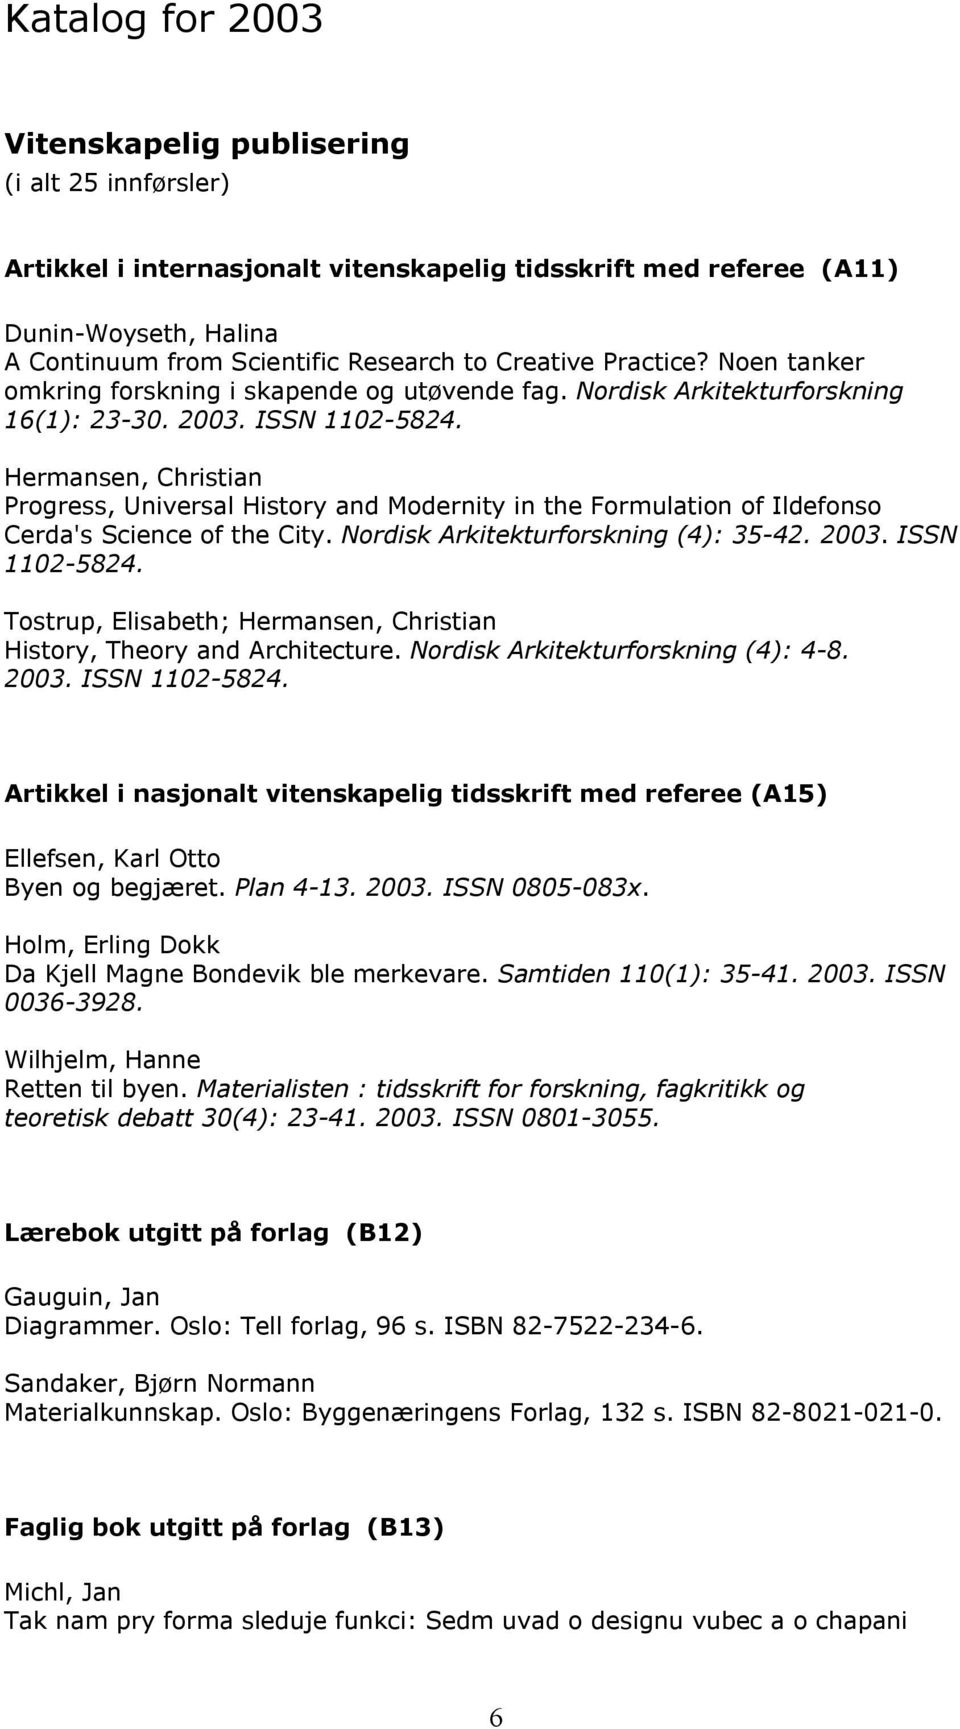 Hermansen, Christian Progress, Universal History and Modernity in the Formulation of Ildefonso Cerda's Science of the City. Nordisk Arkitekturforskning (4): 35-42. 2003. ISSN 1102-5824.